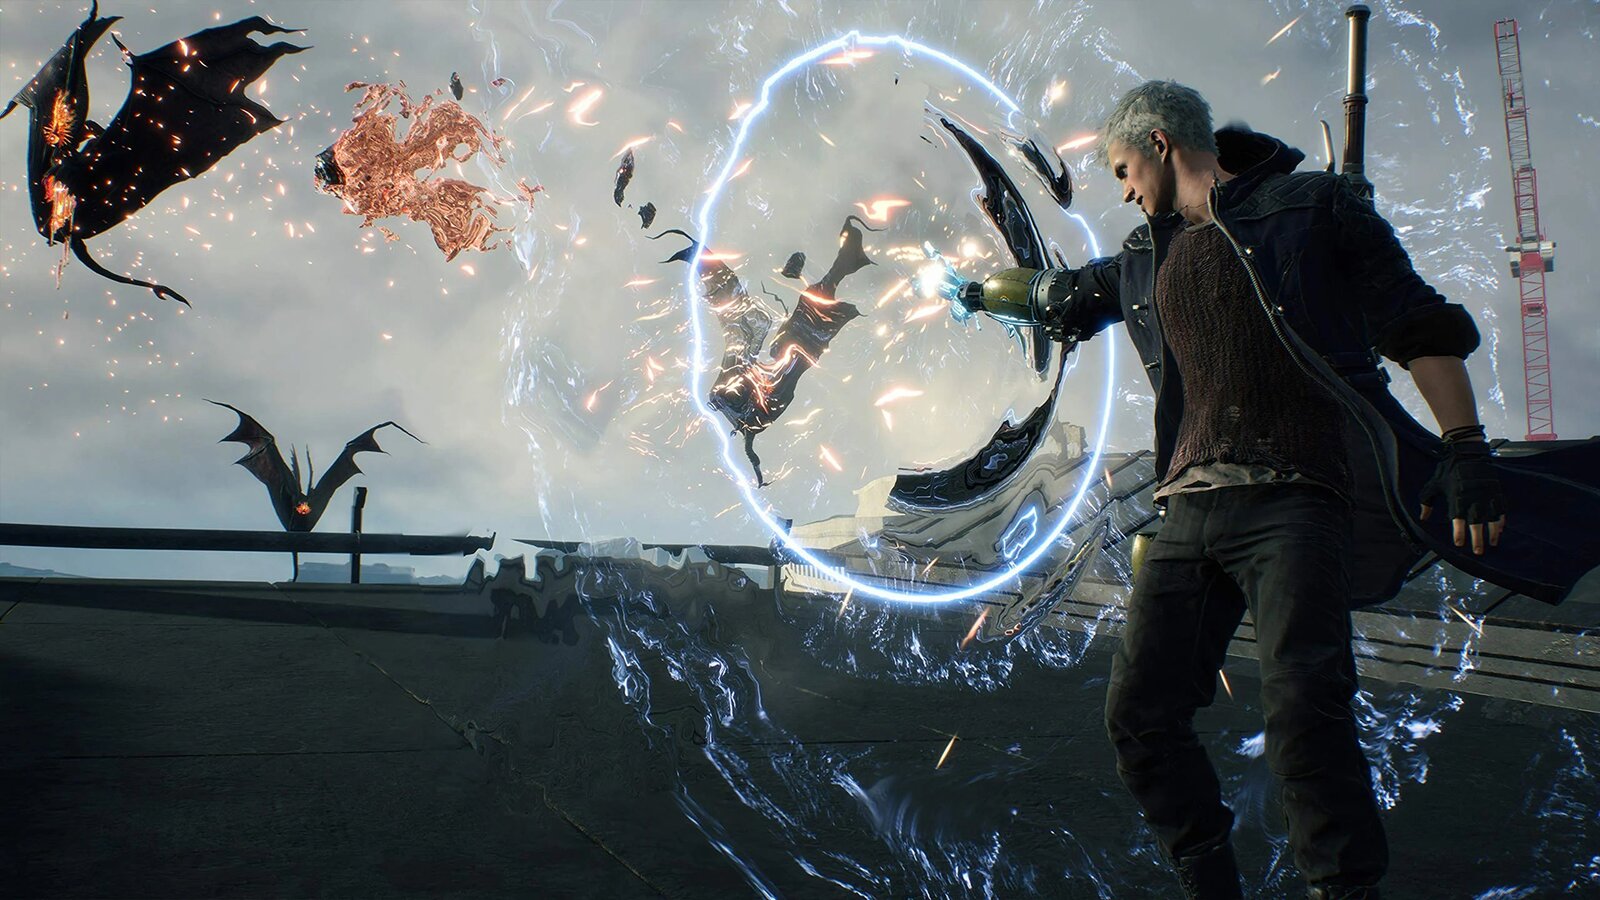 Devil May Cry 5 - Deluxe Edition + Vergil